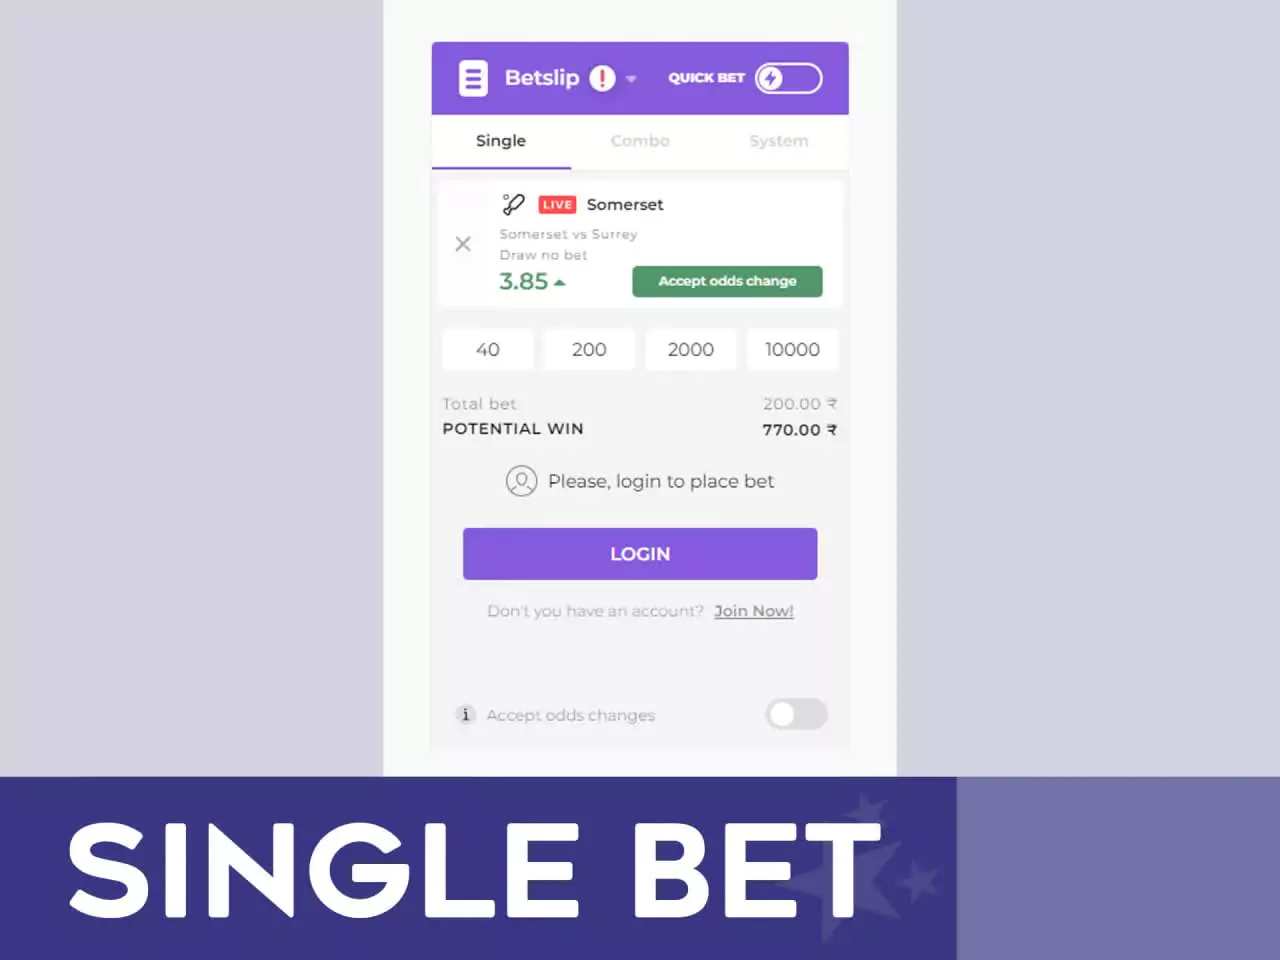 Single bet is the simplest way to place a bet.